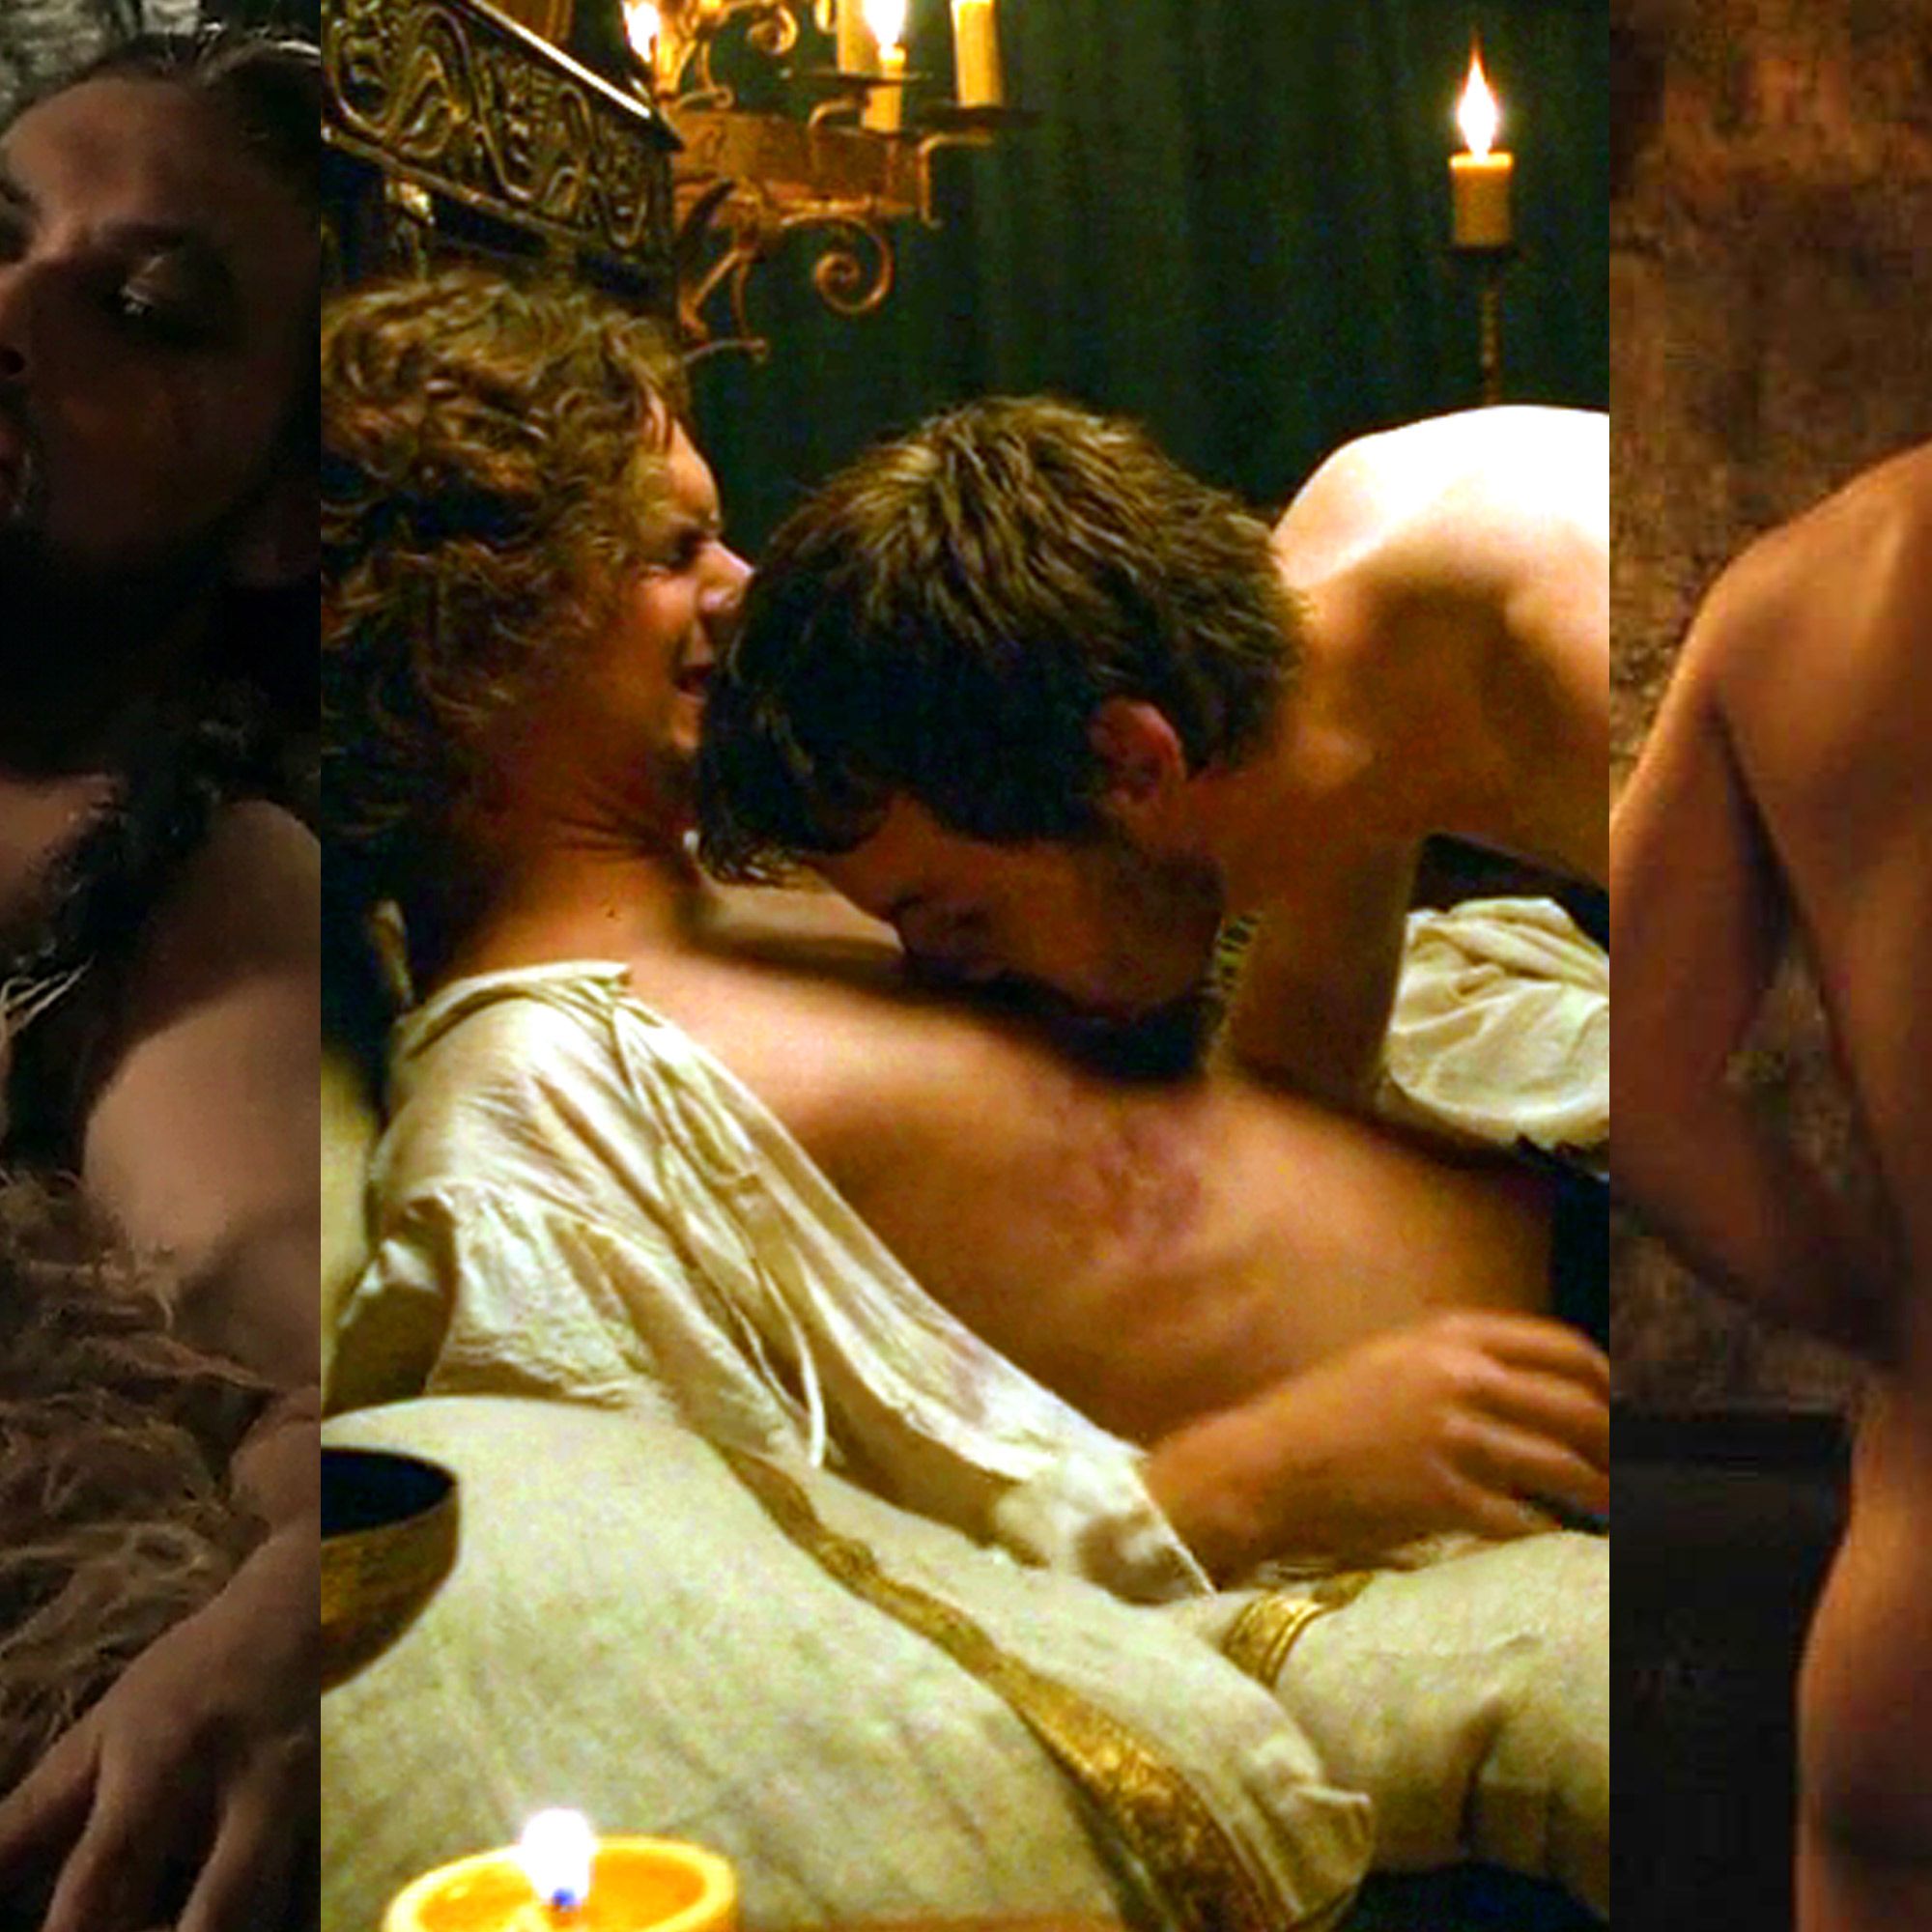 Game of throne sex scene from behind